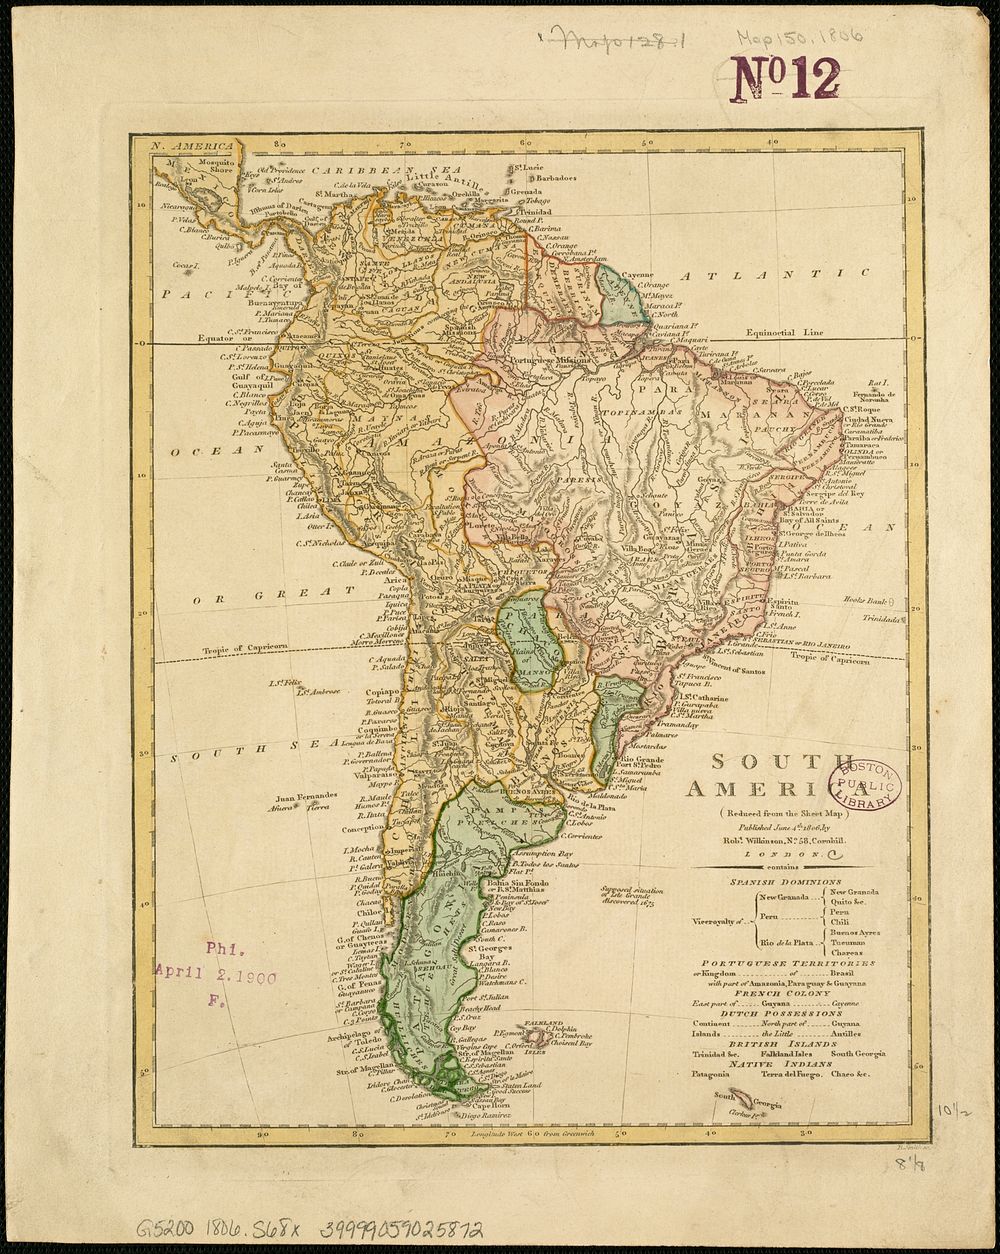             South America : reduced from the sheet map          